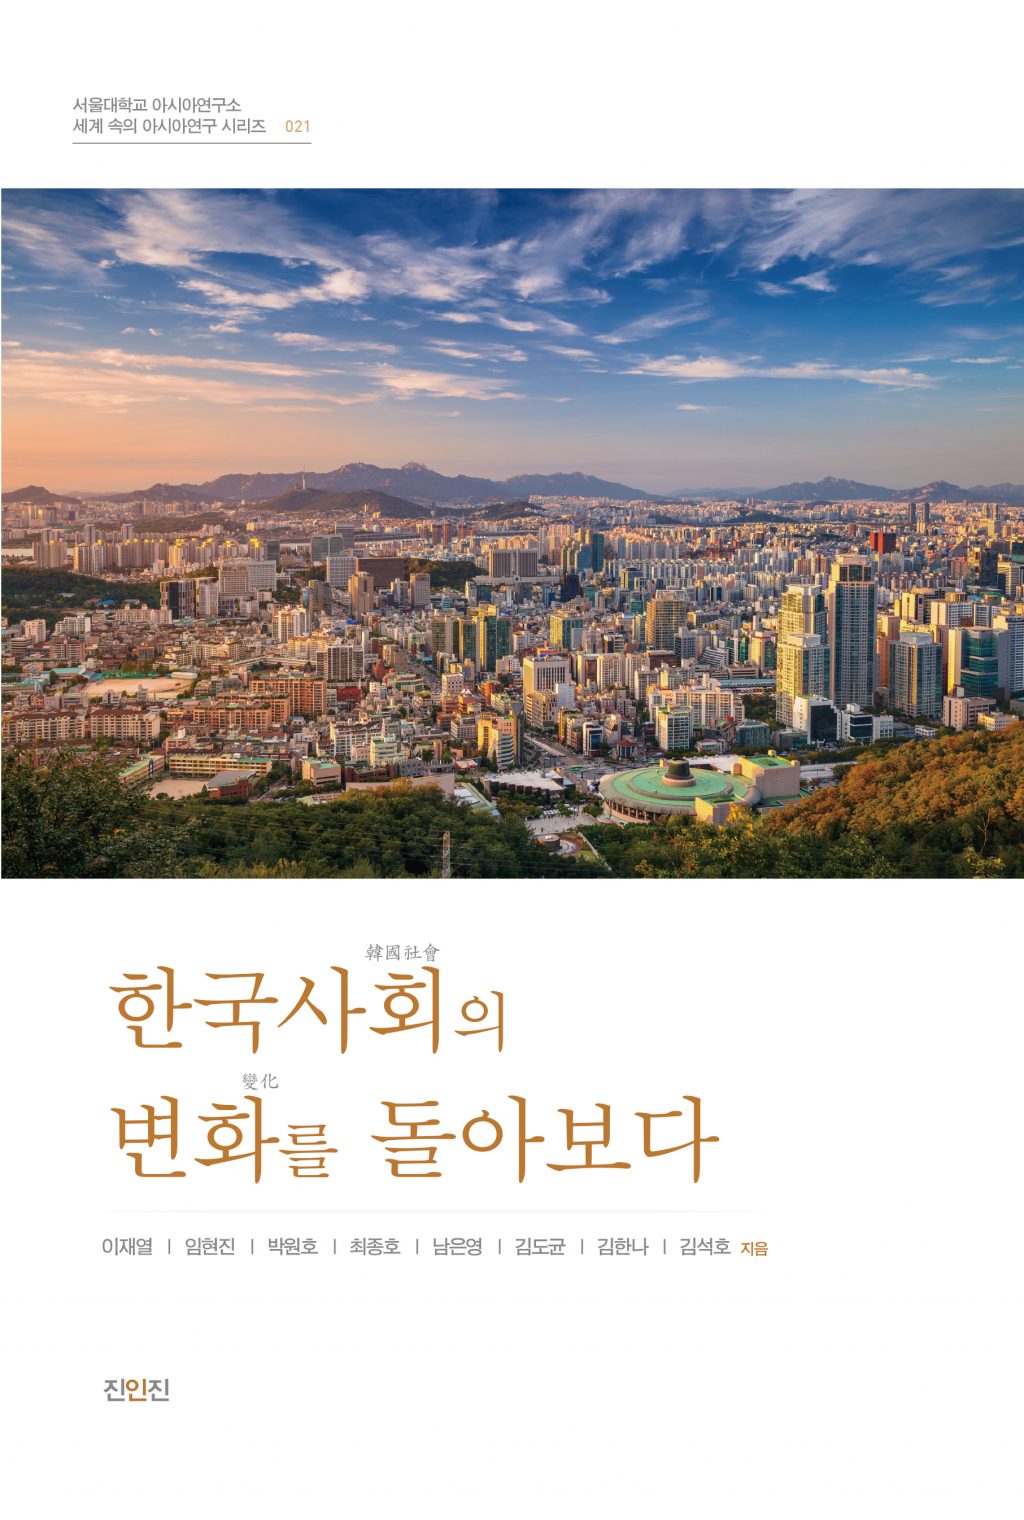 Tracing the 70 Years of Social Change in Korea